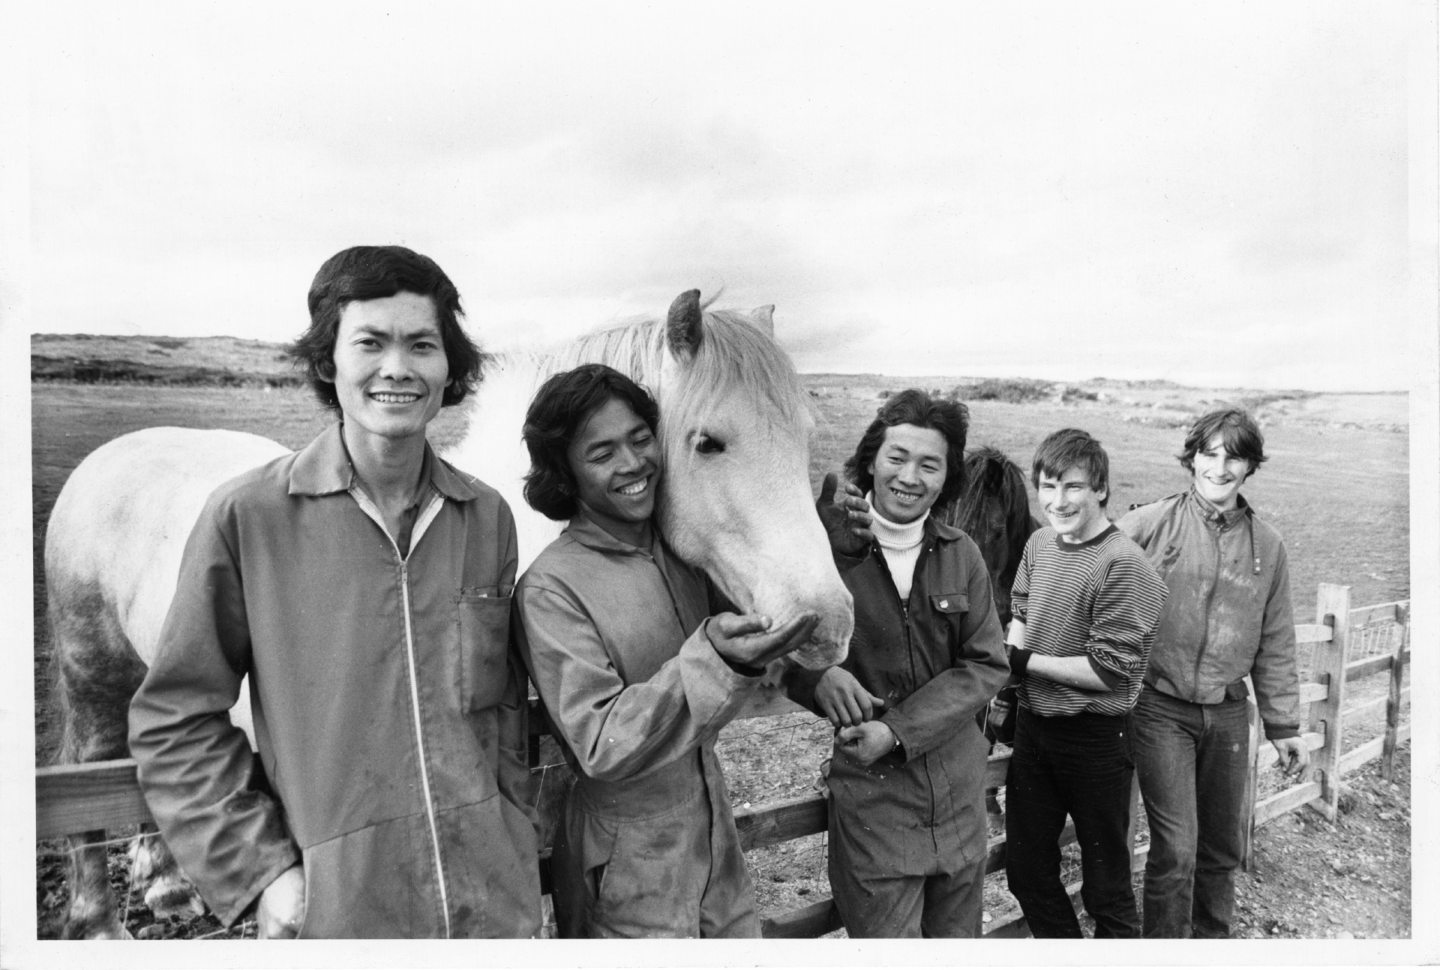 Two Vietnamese refugees pose with Prince the horse and two Aberdeen boys at Doonies Rare Breeds Farm in 1983.